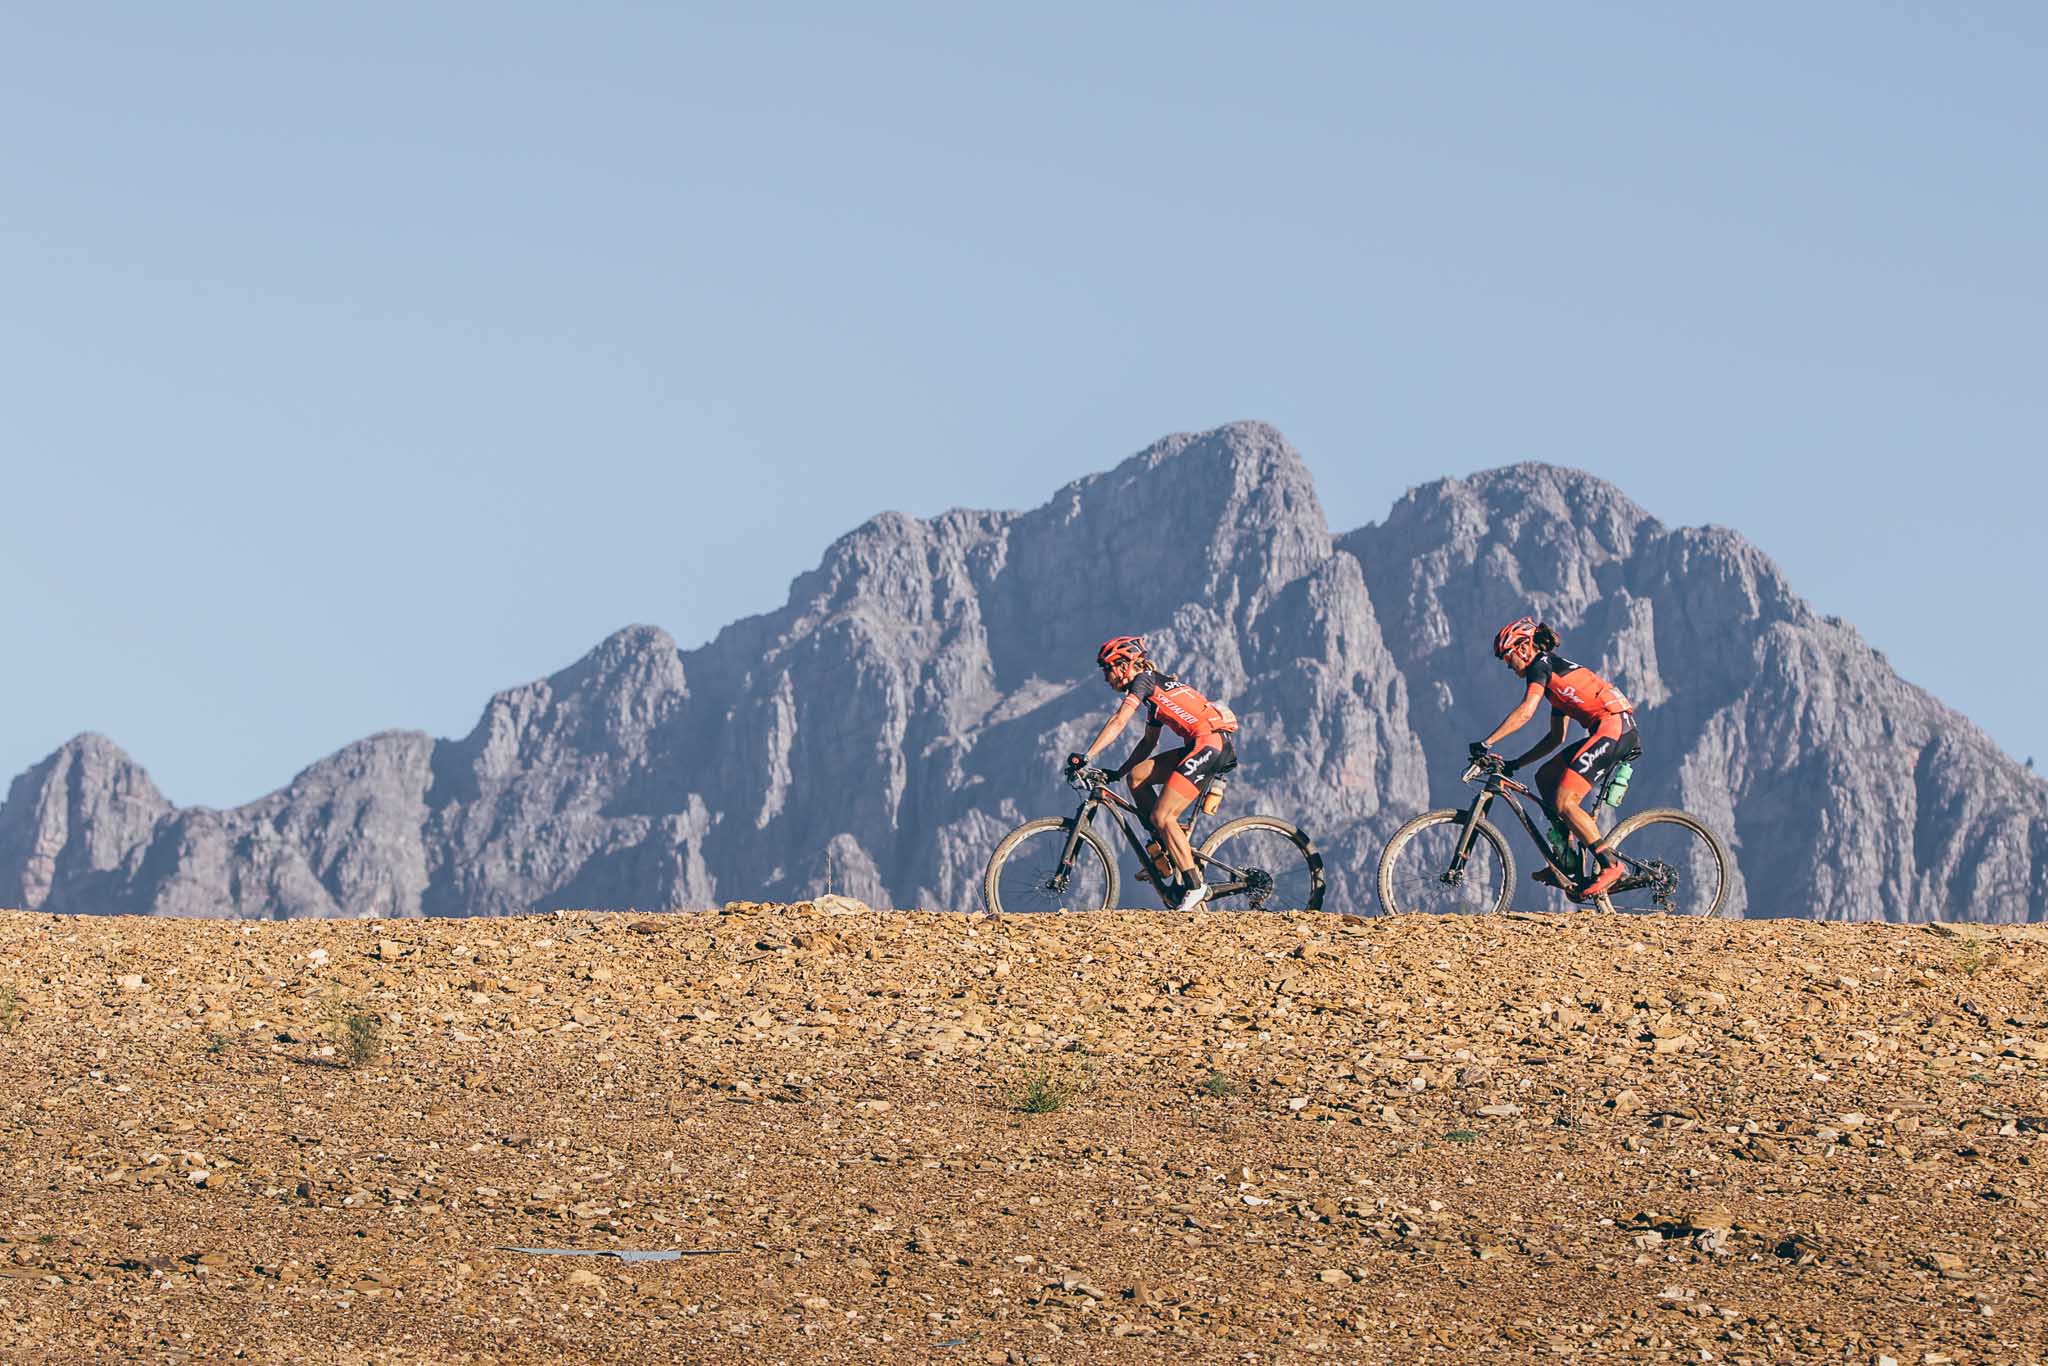 Team Spur-Specialized's Annika Langvad and Ariane Kleinhans leading most of the way, however settling for second position on the day, during stage 1 of the 2016 Absa Cape Epic Mountain Bike stage race held from Saronsberg Wine Estate in Tulbagh, South Africa on the 14th March 2016 Photo by Ewald Sadie/Cape Epic/SPORTZPICS PLEASE ENSURE THE APPROPRIATE CREDIT IS GIVEN TO THE PHOTOGRAPHER AND SPORTZPICS ALONG WITH THE ABSA CAPE EPIC {ace2016}